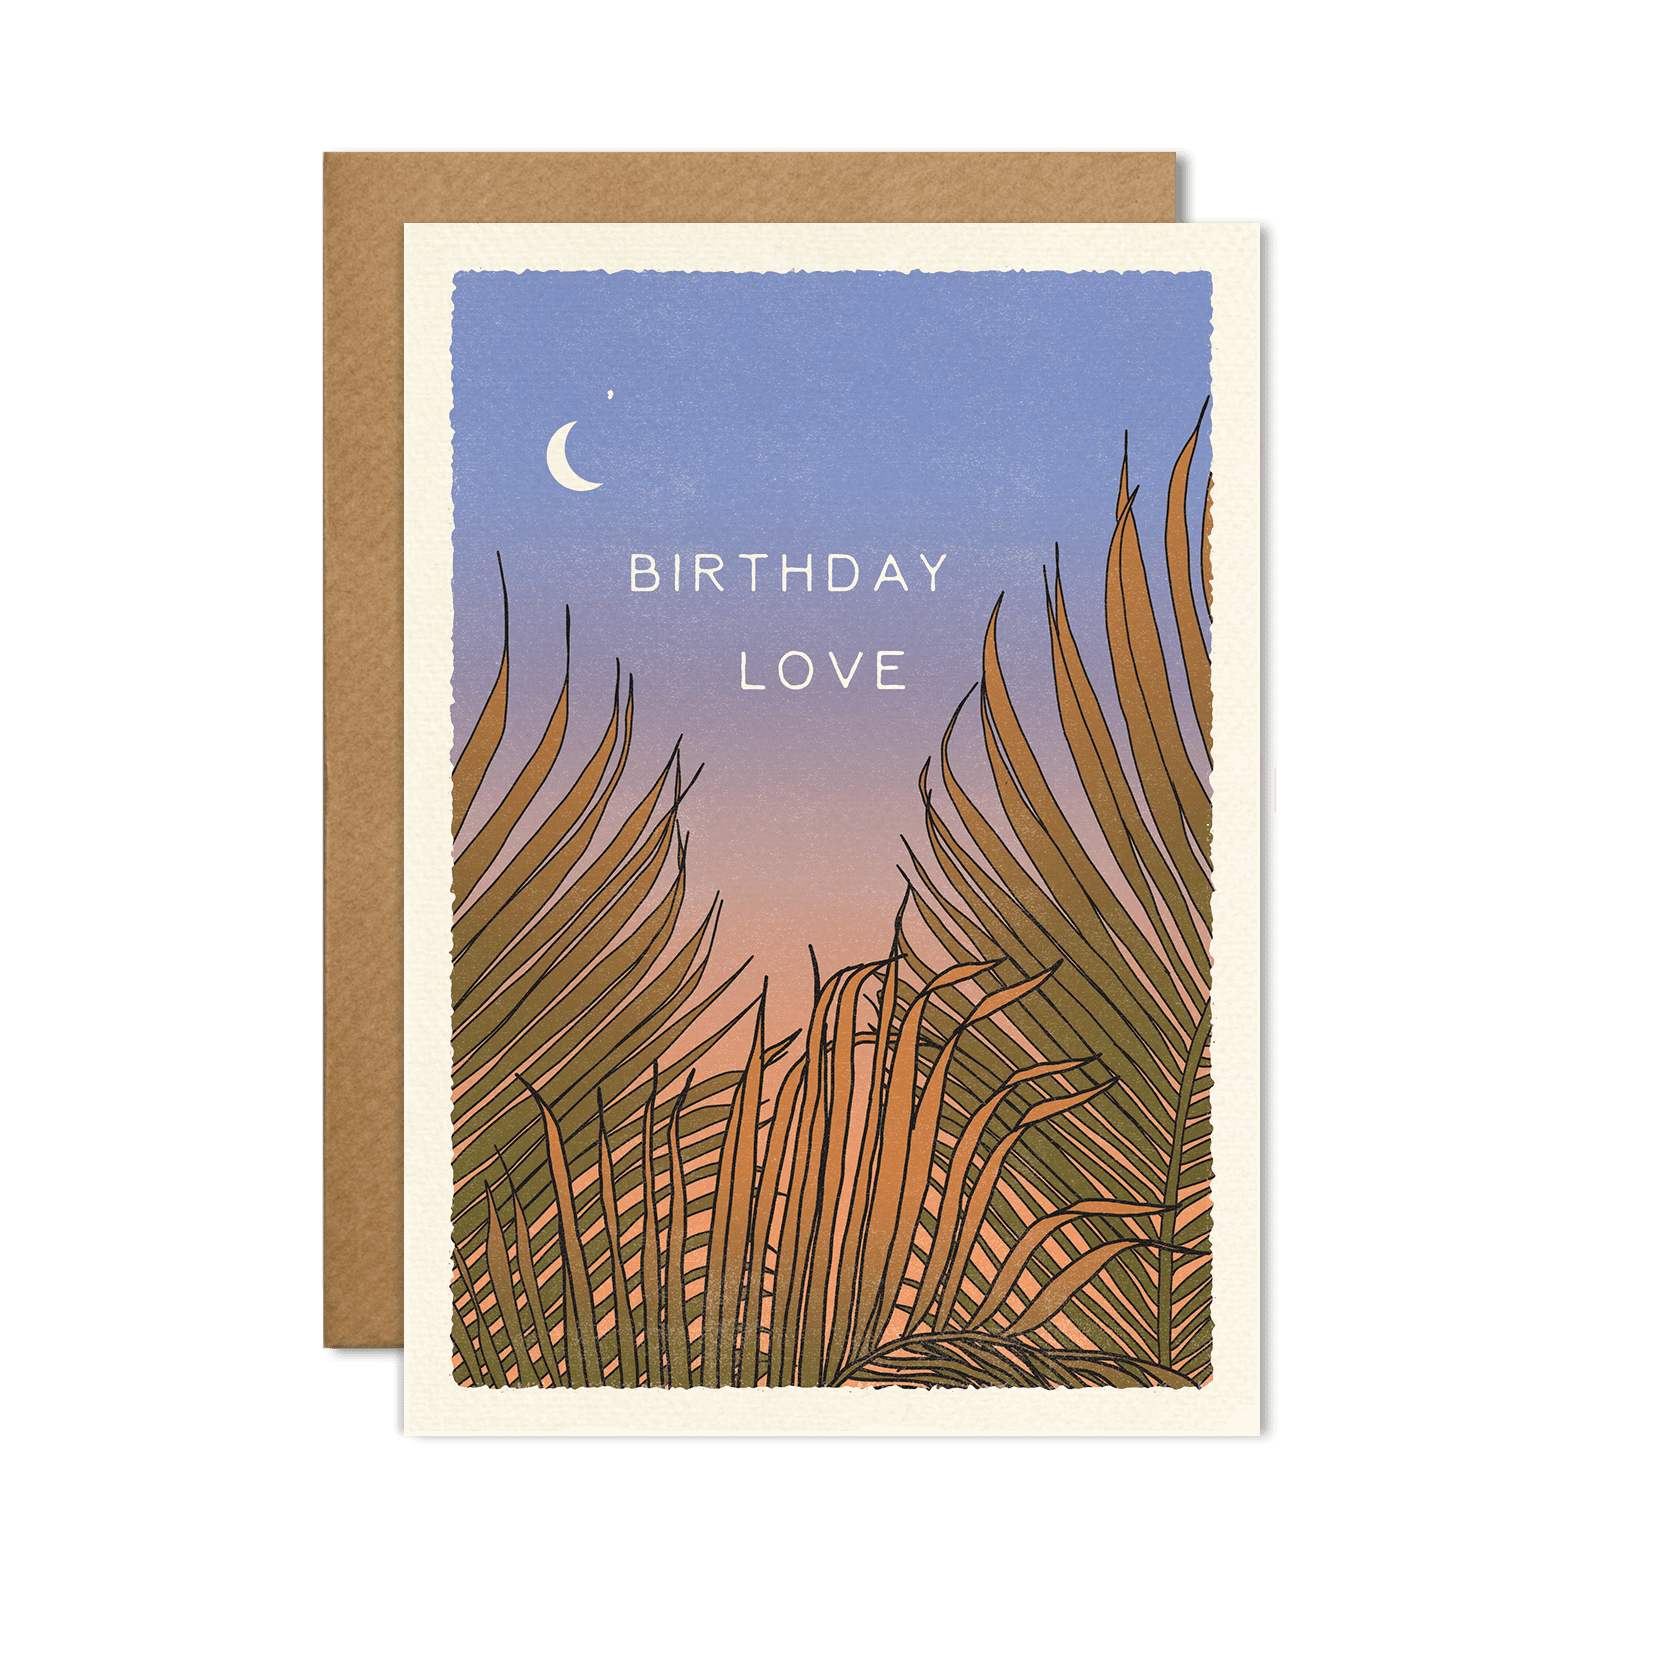 Birthday Love Card - Out of the Blue